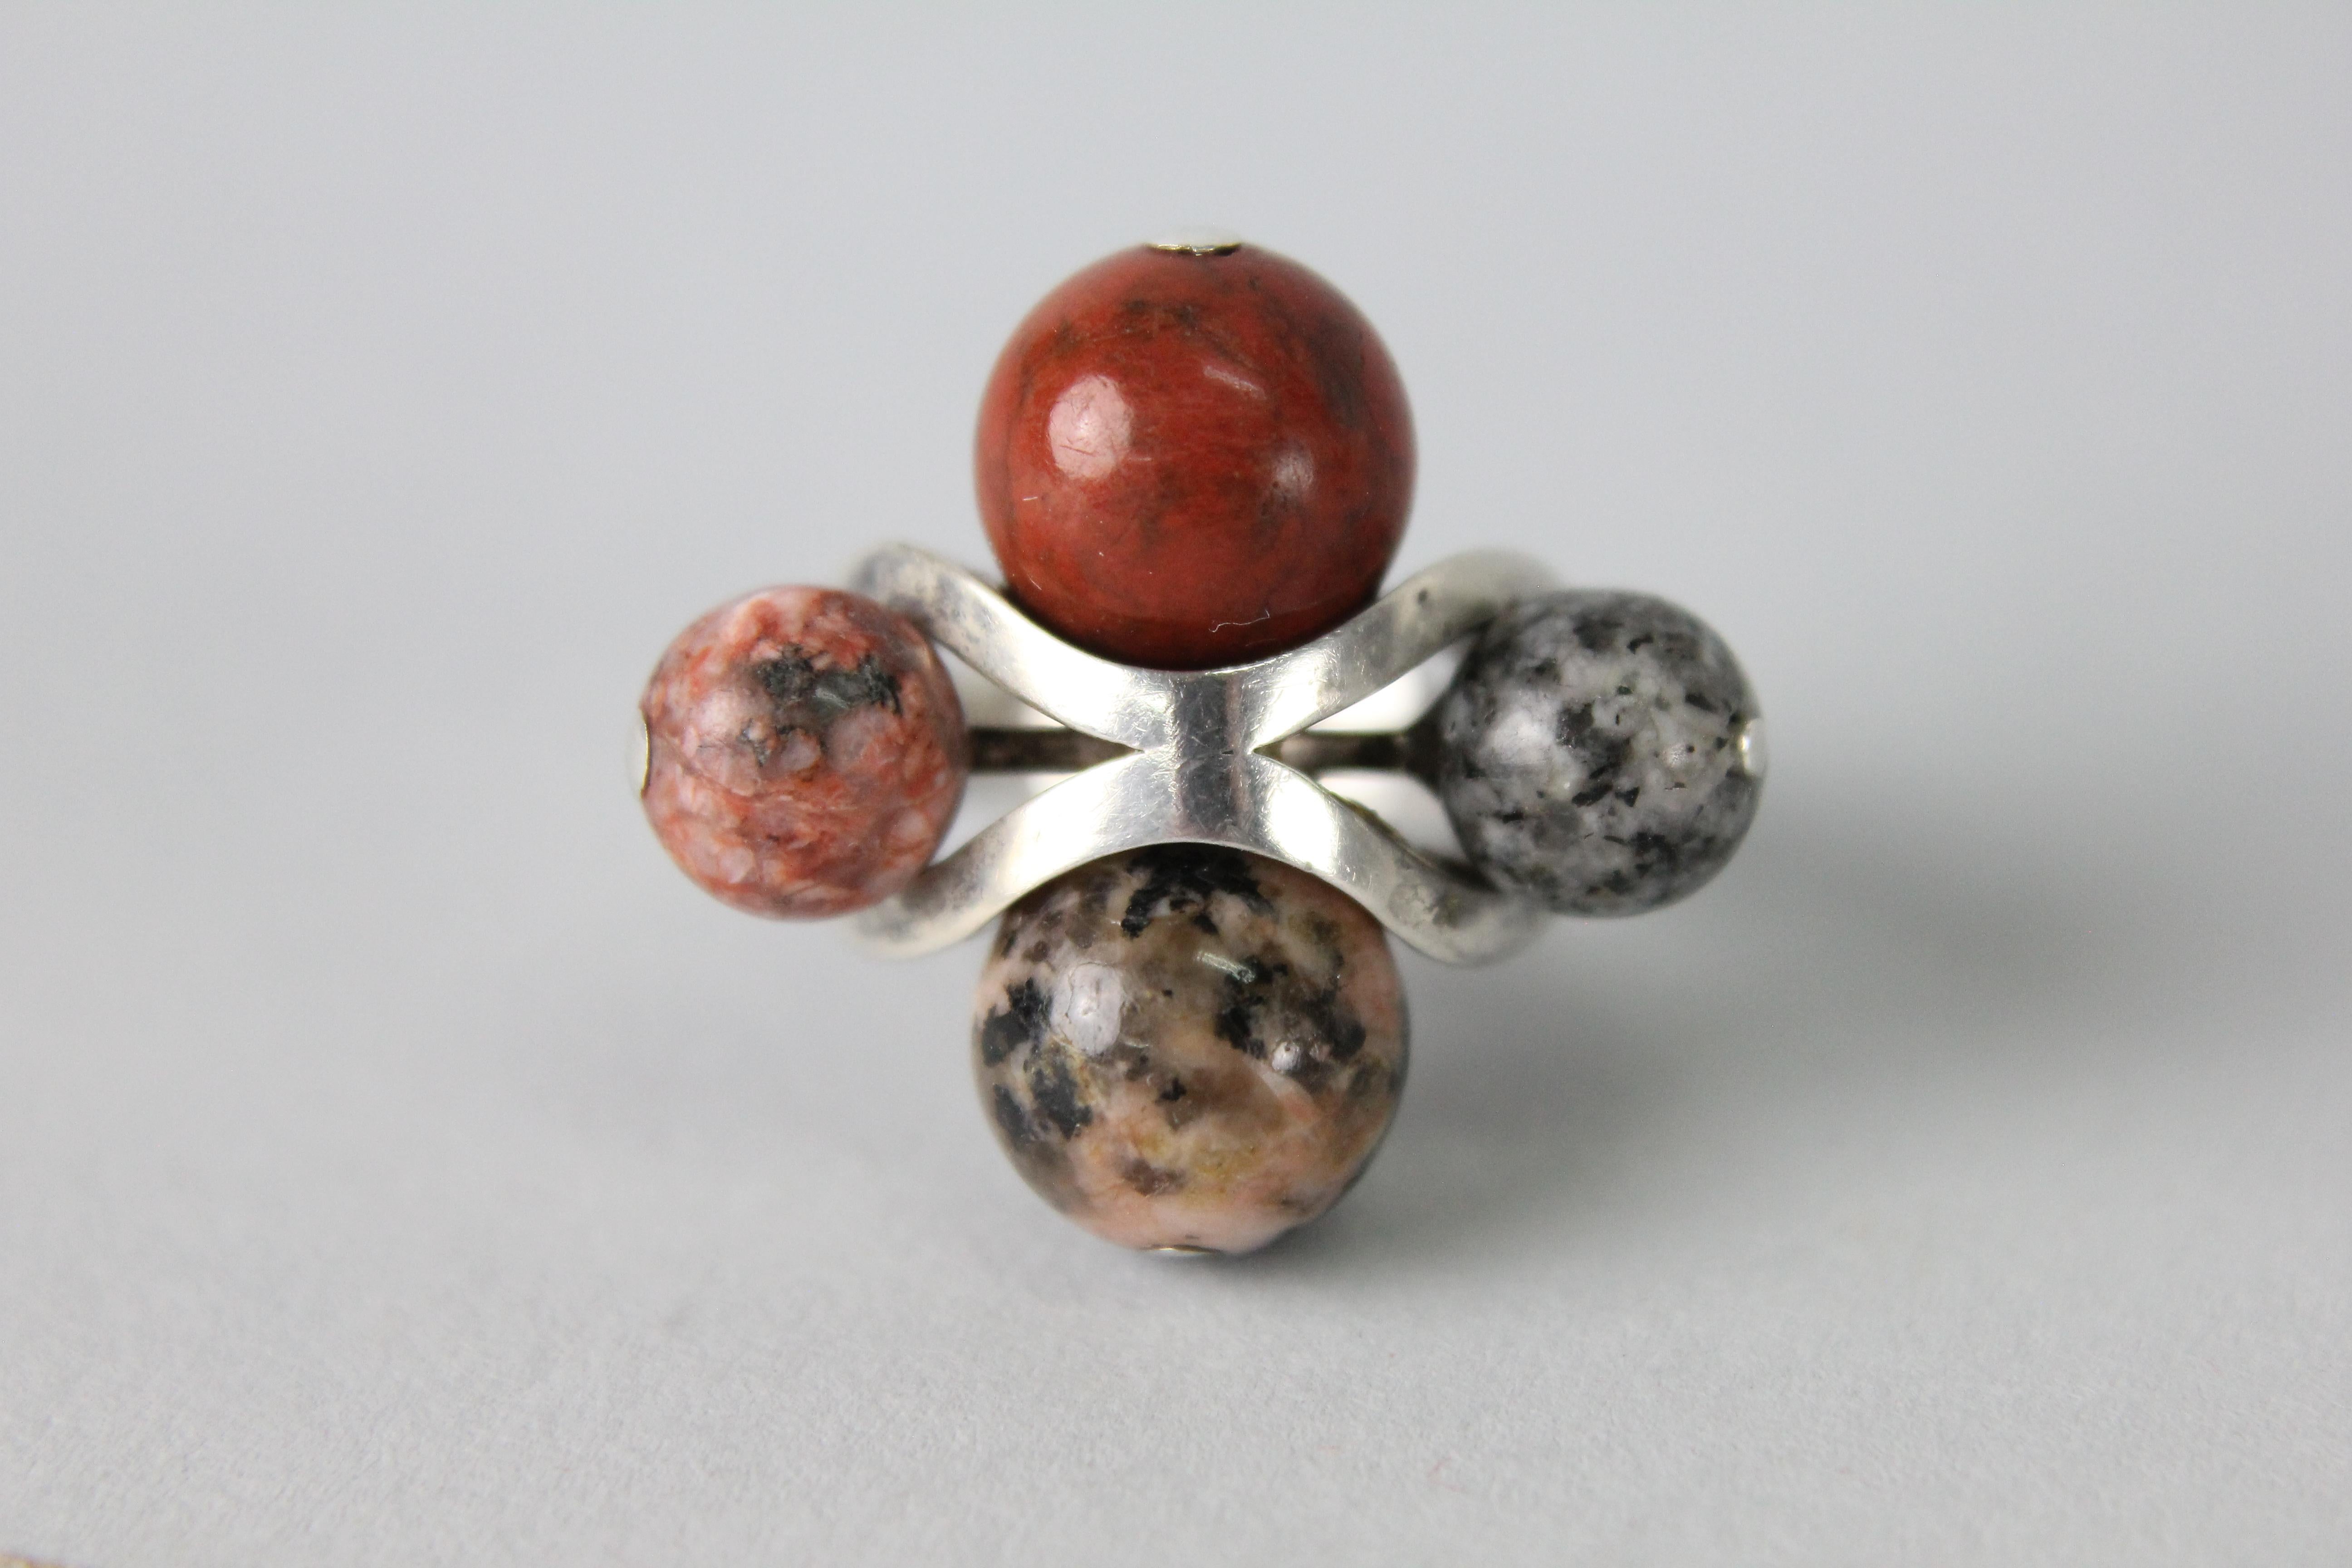 Scandinavian Modernist Ring in silver and porphyry by Hugo Strömdahl, Stockholm Sweden 1942.
Very rare and unusual ring with four different kinds of Swedish porphyry stones.
Ring size 14, Us size 4.
Nice vintage condition.